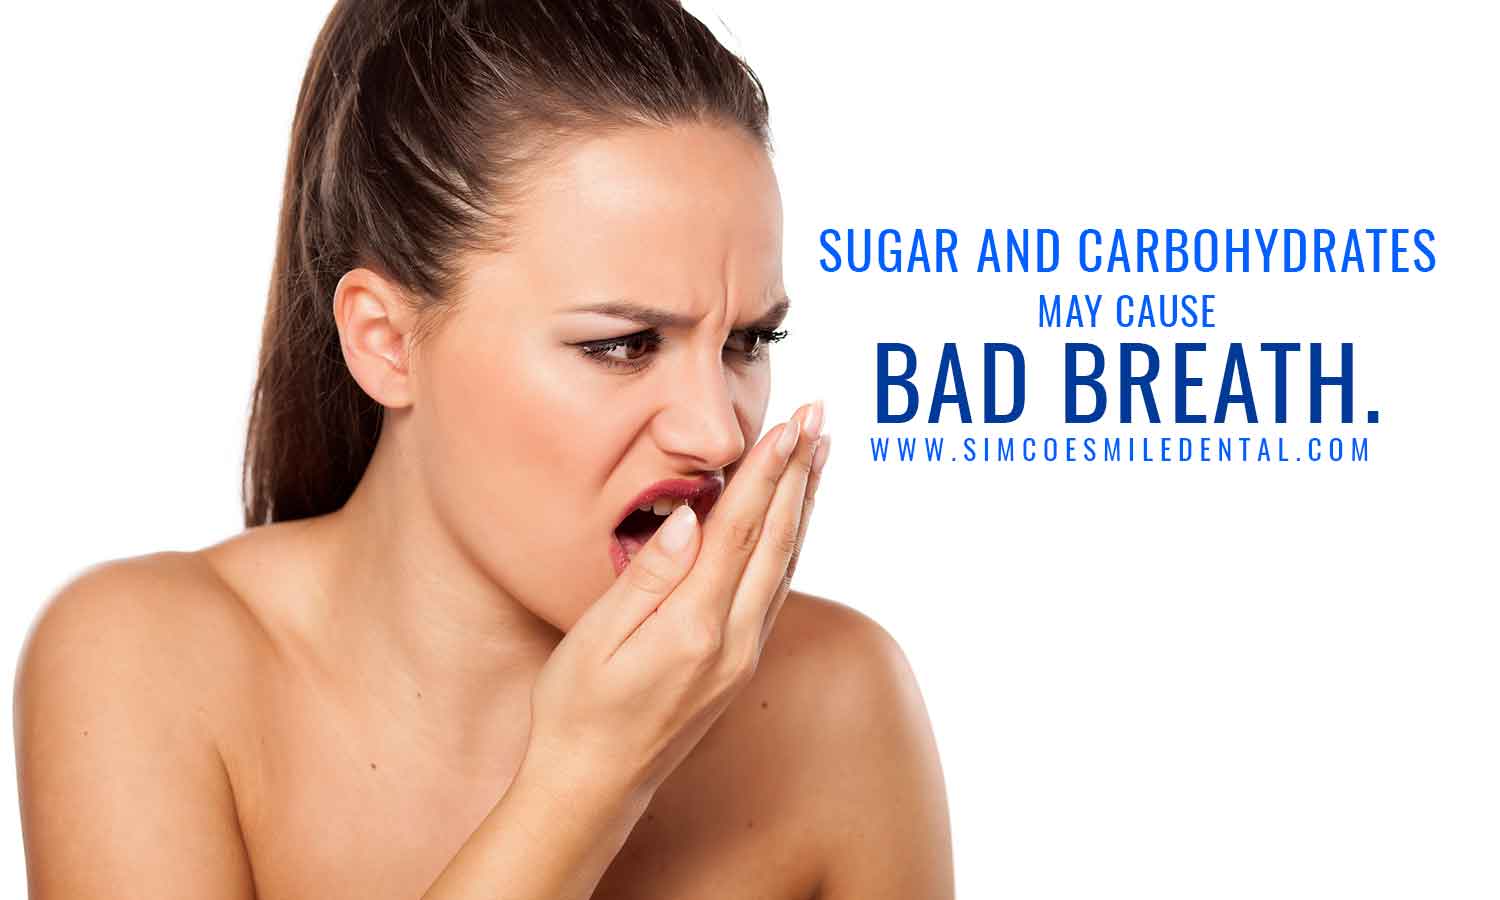 Sugar and carbohydrates may cause bad breath.